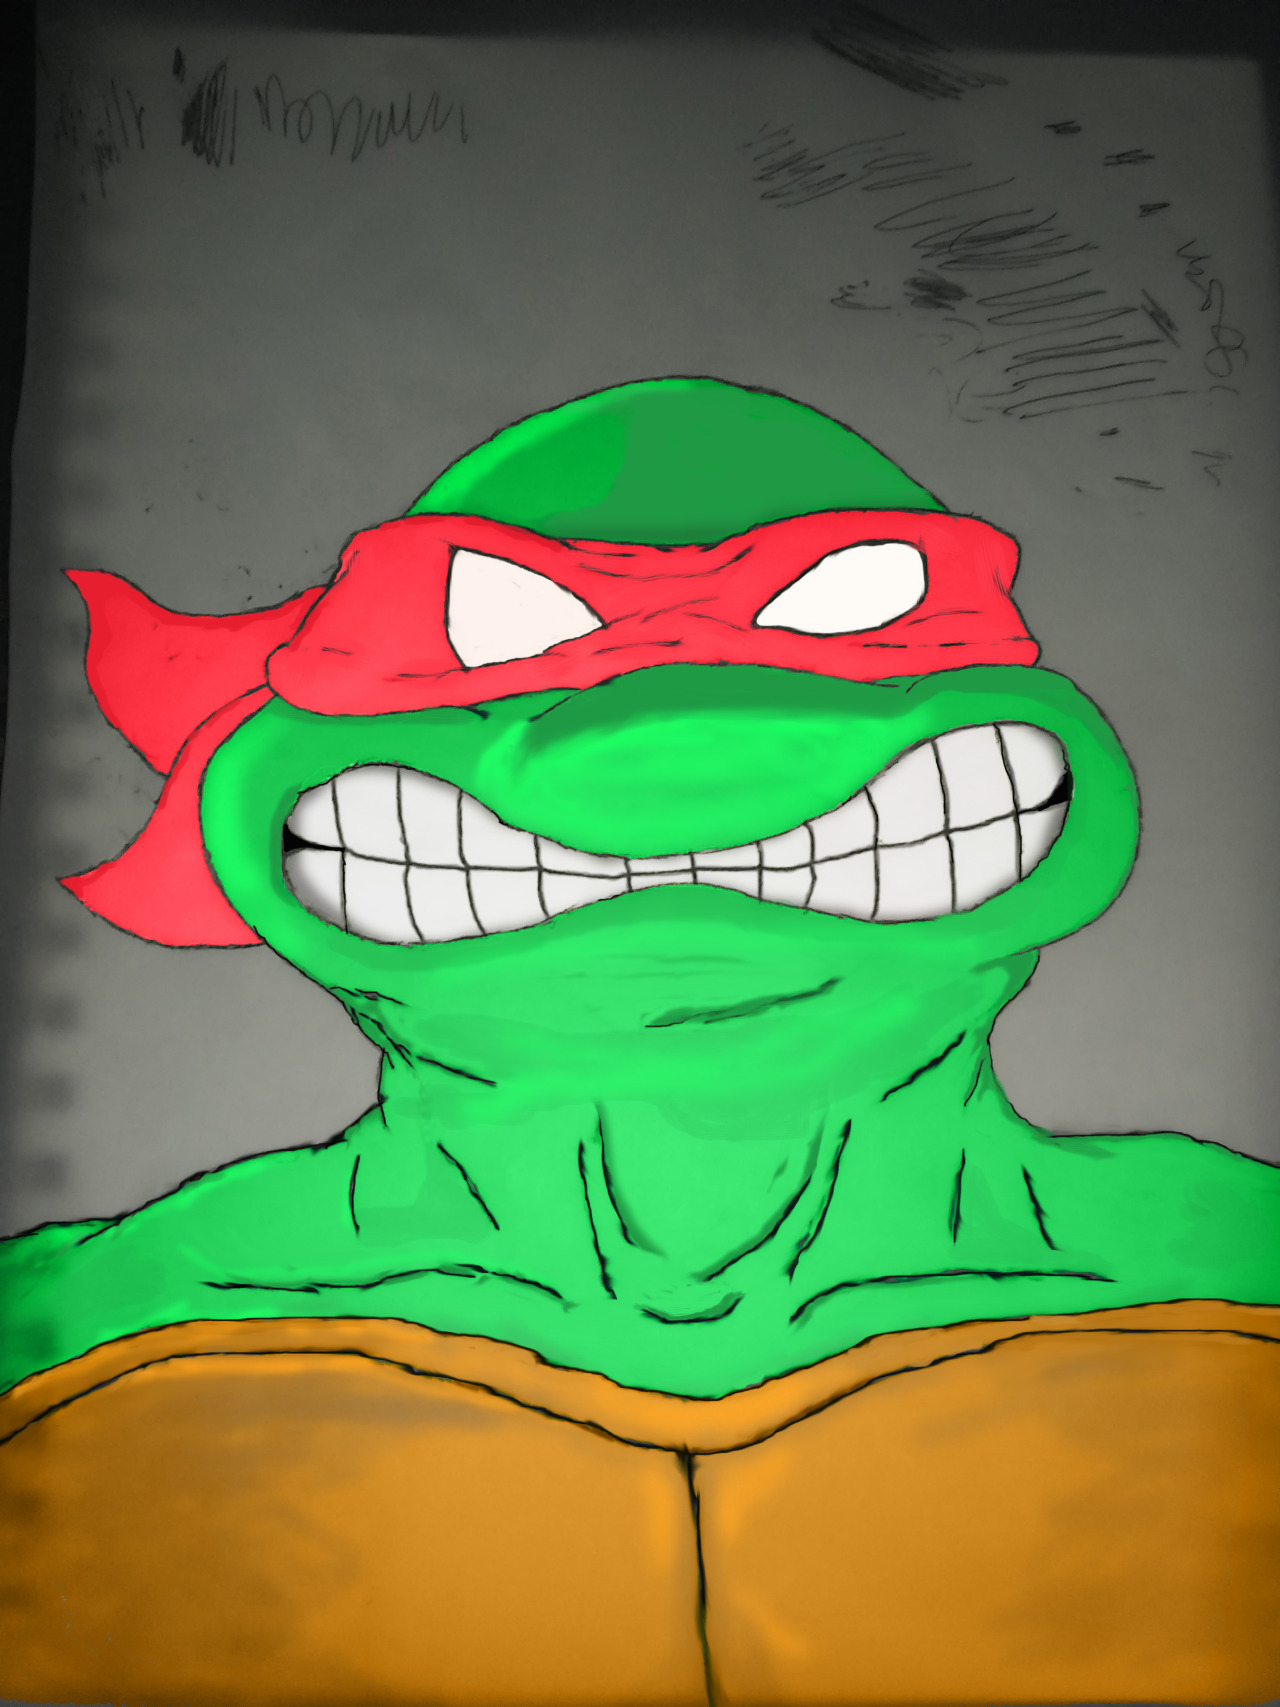 I don’t usually add color to my art but I’ve got to get practice with it at some point right? For my first time using photoshop to color I think ol’Raphy here turned out pretty good! Now to do the other 3! #tmnt #teenage mutant ninja turtles #raph#raphael#my artwrok#my art